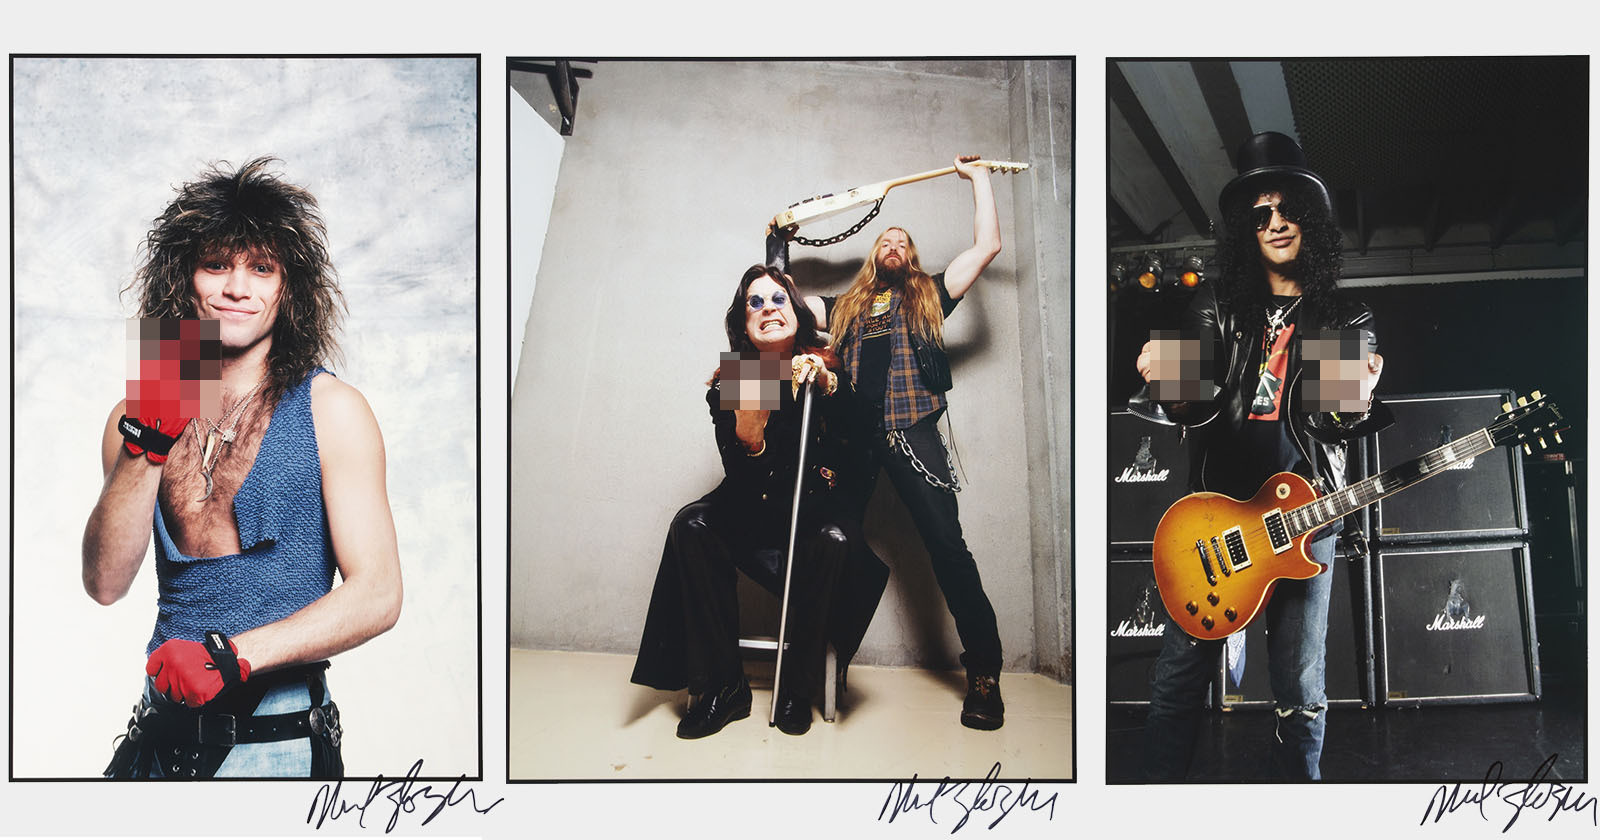 For Sale: Photos of Famous Rock Stars Flipping the Bird